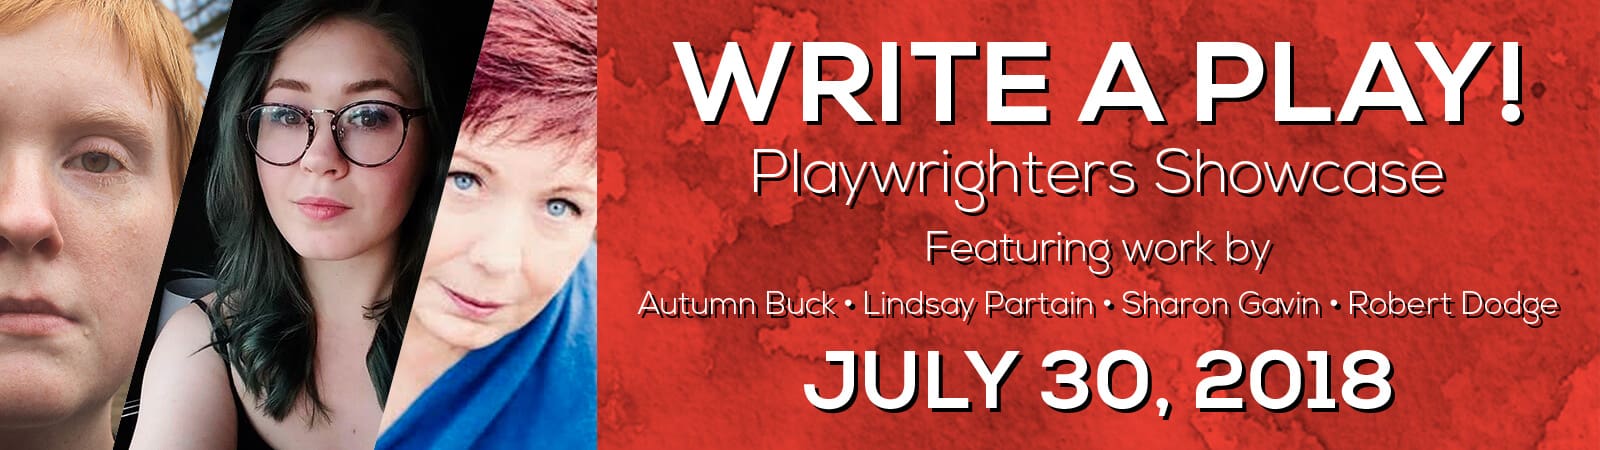 Playwrights_Website Banner